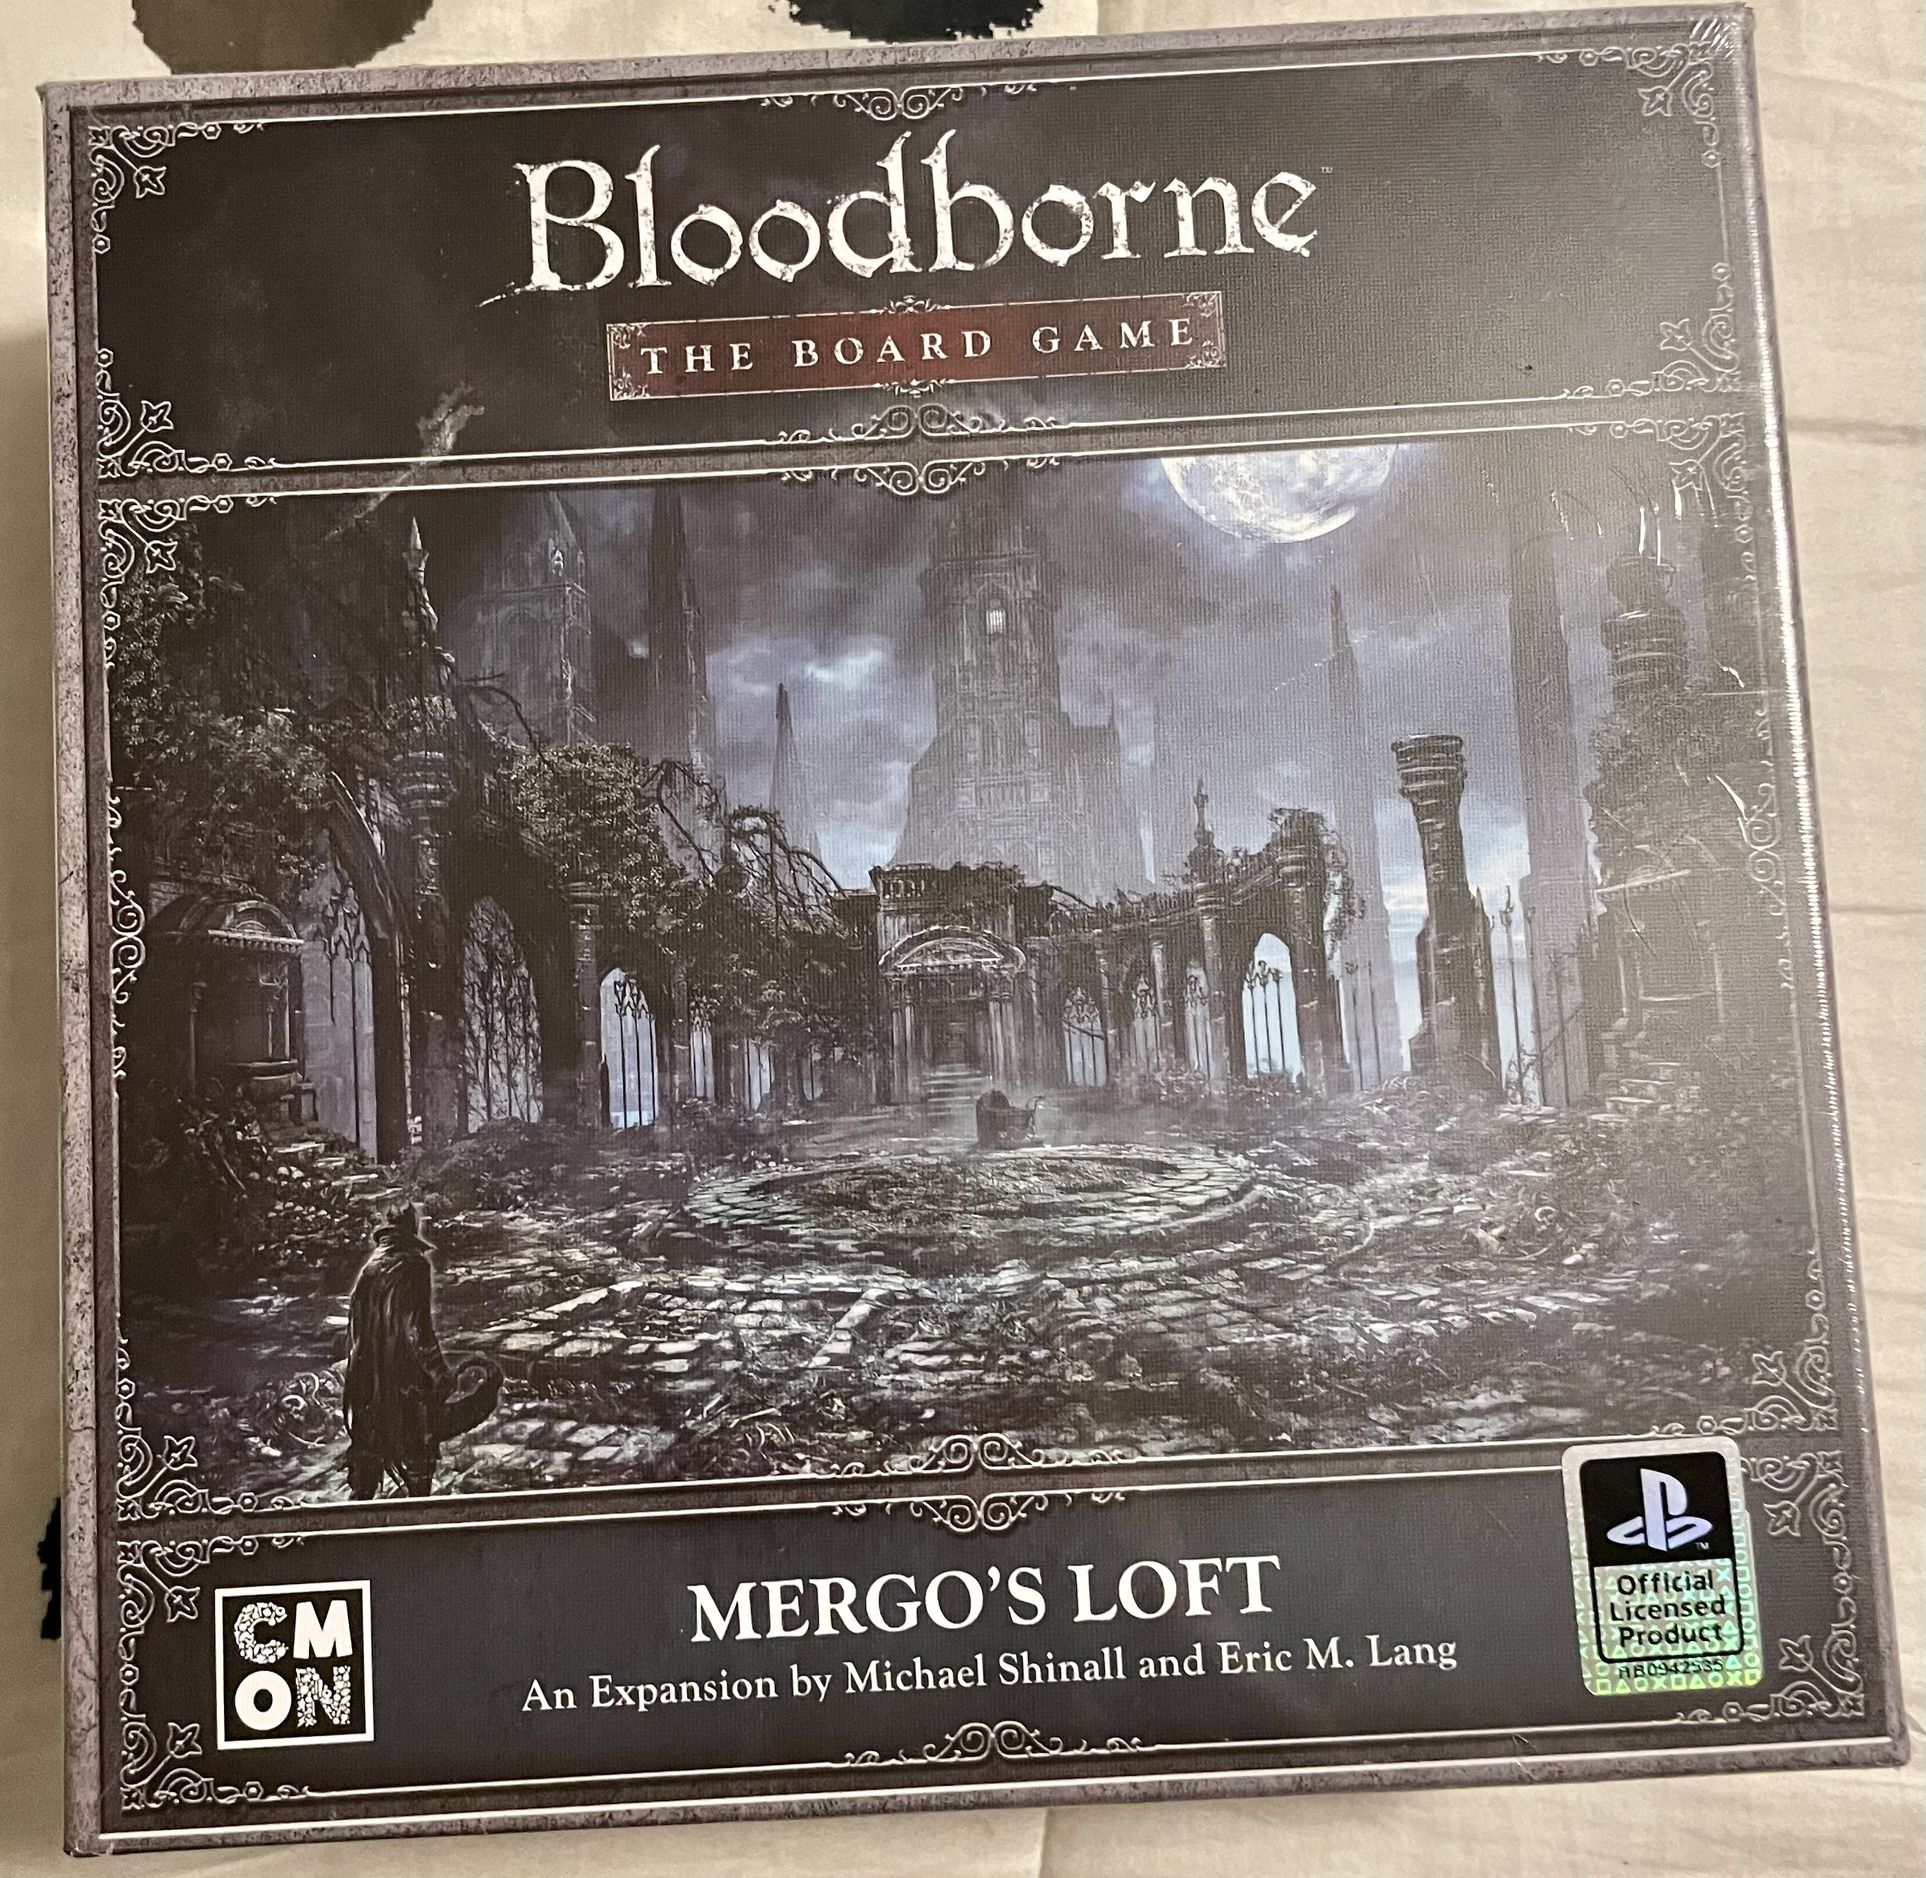 Blood borne “The Board Game” Brand New